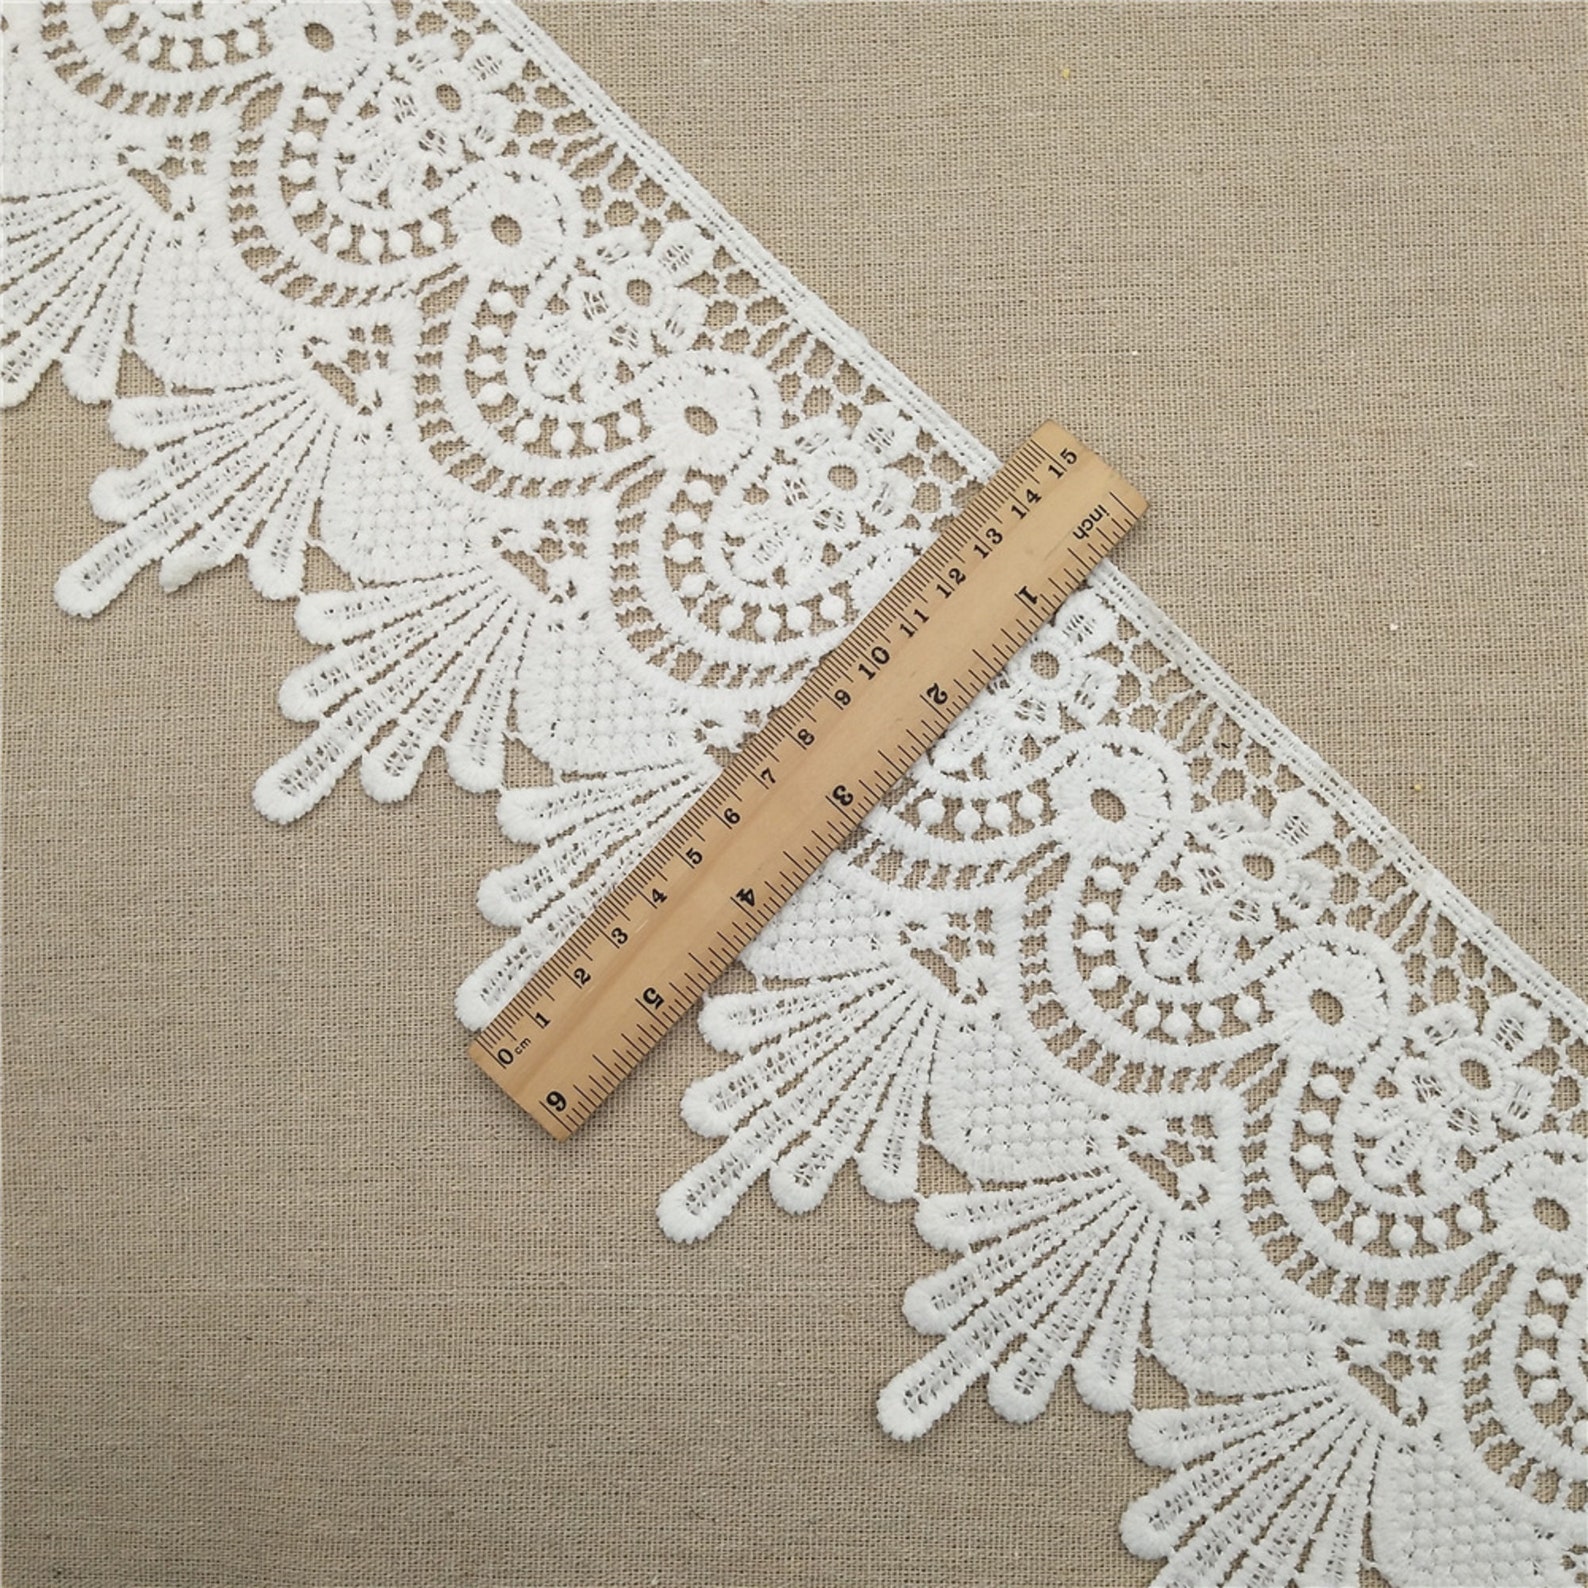 Wide Scallop Lace Trim Sewing Lace Trim White Polyester - Etsy